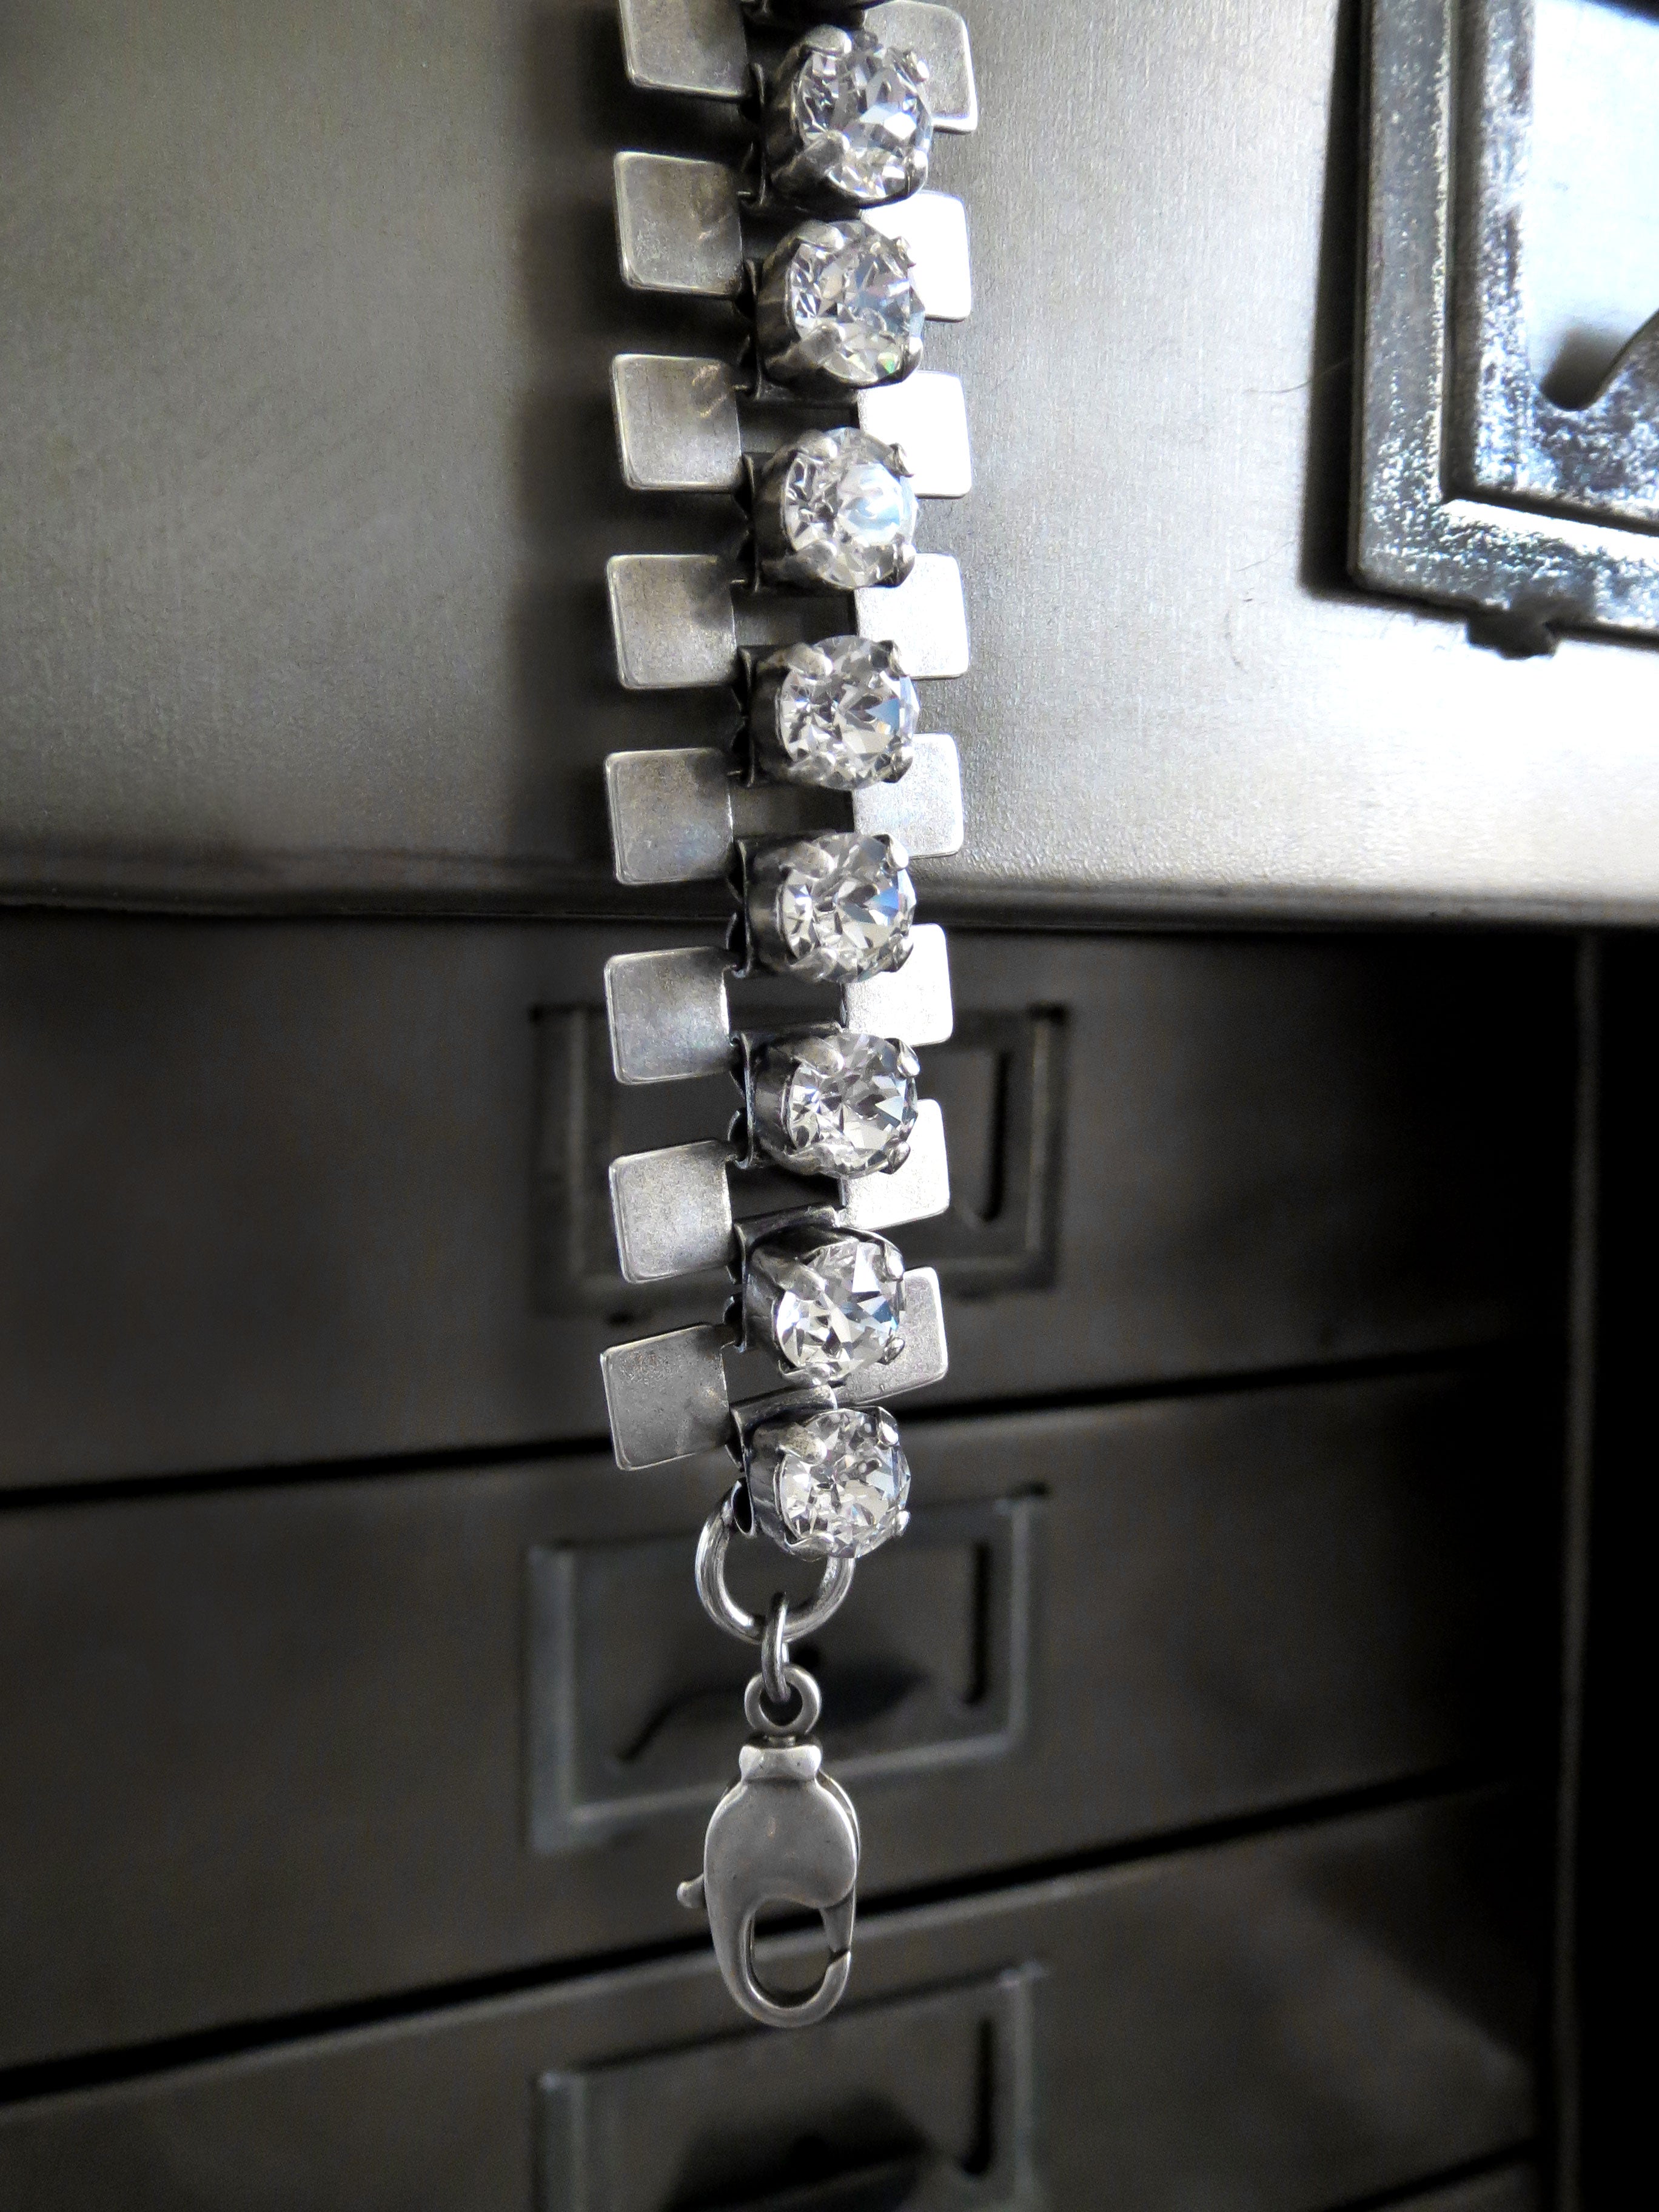 MOVEMENT - Industrial Style Bracelet with Clear Rhinestone Crystals